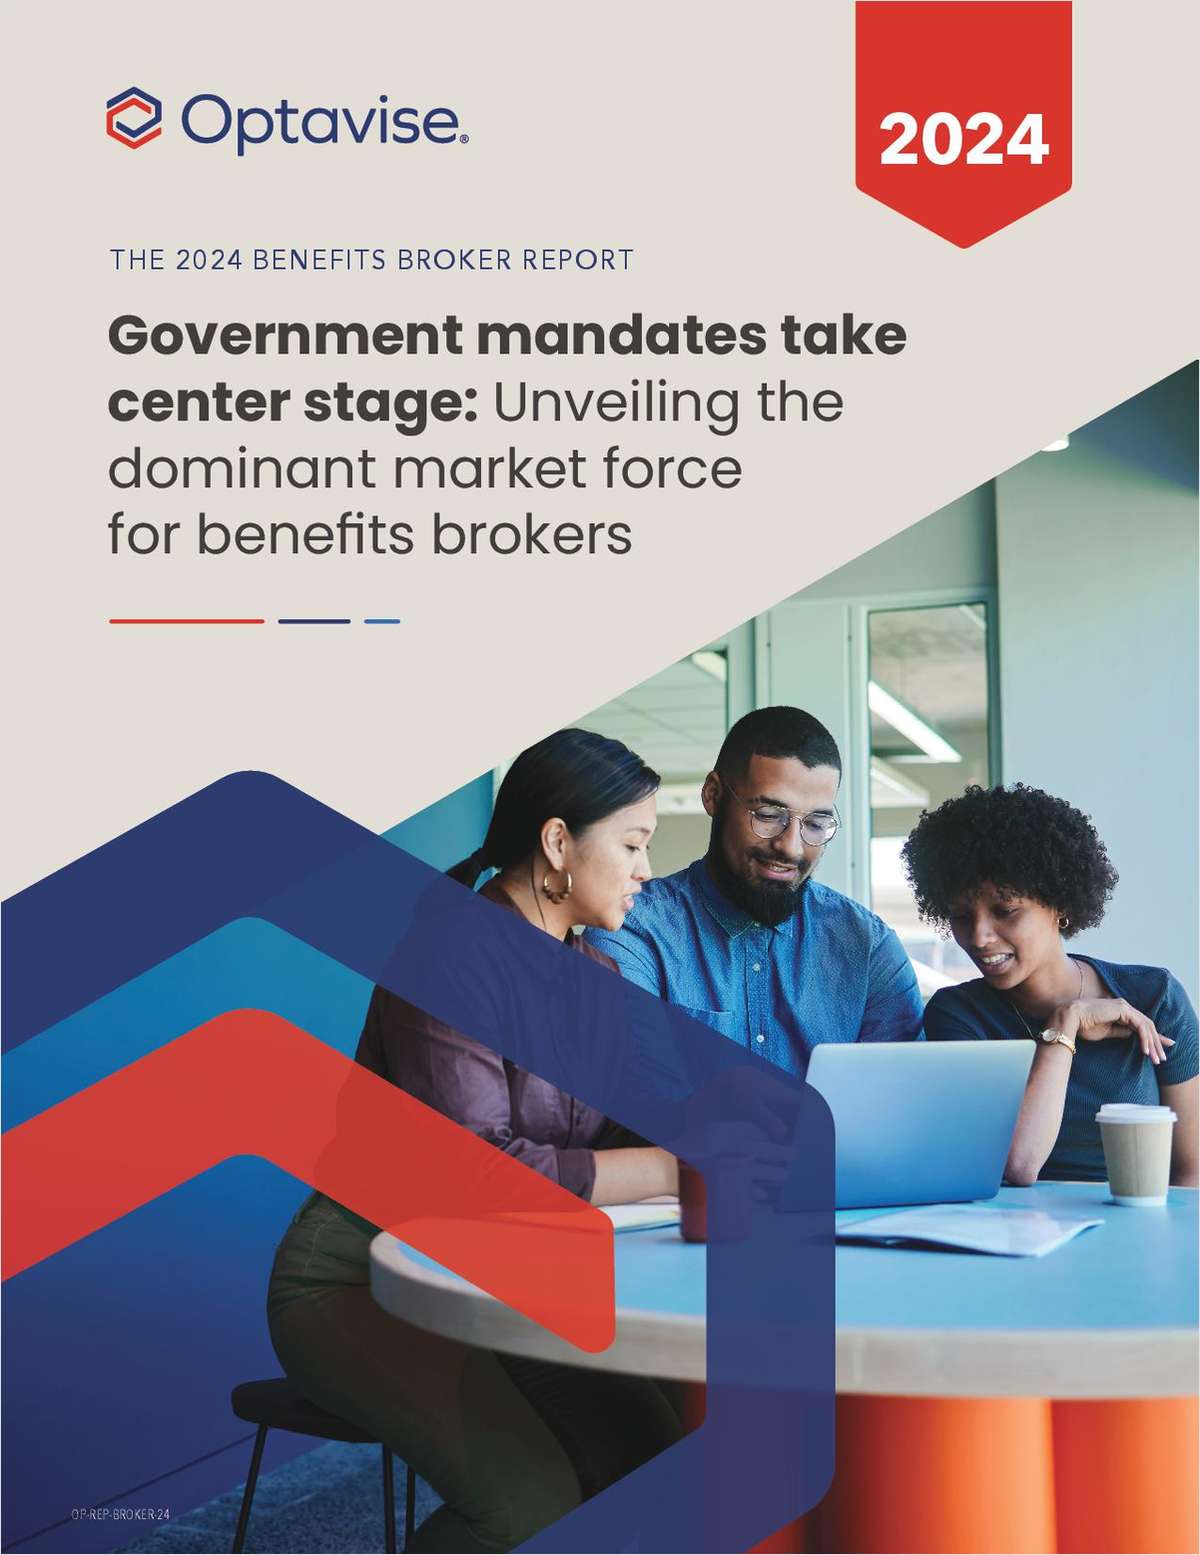 The 2024 Benefits Broker Report: Unveiling the Dominant Market Force for Benefits Brokers